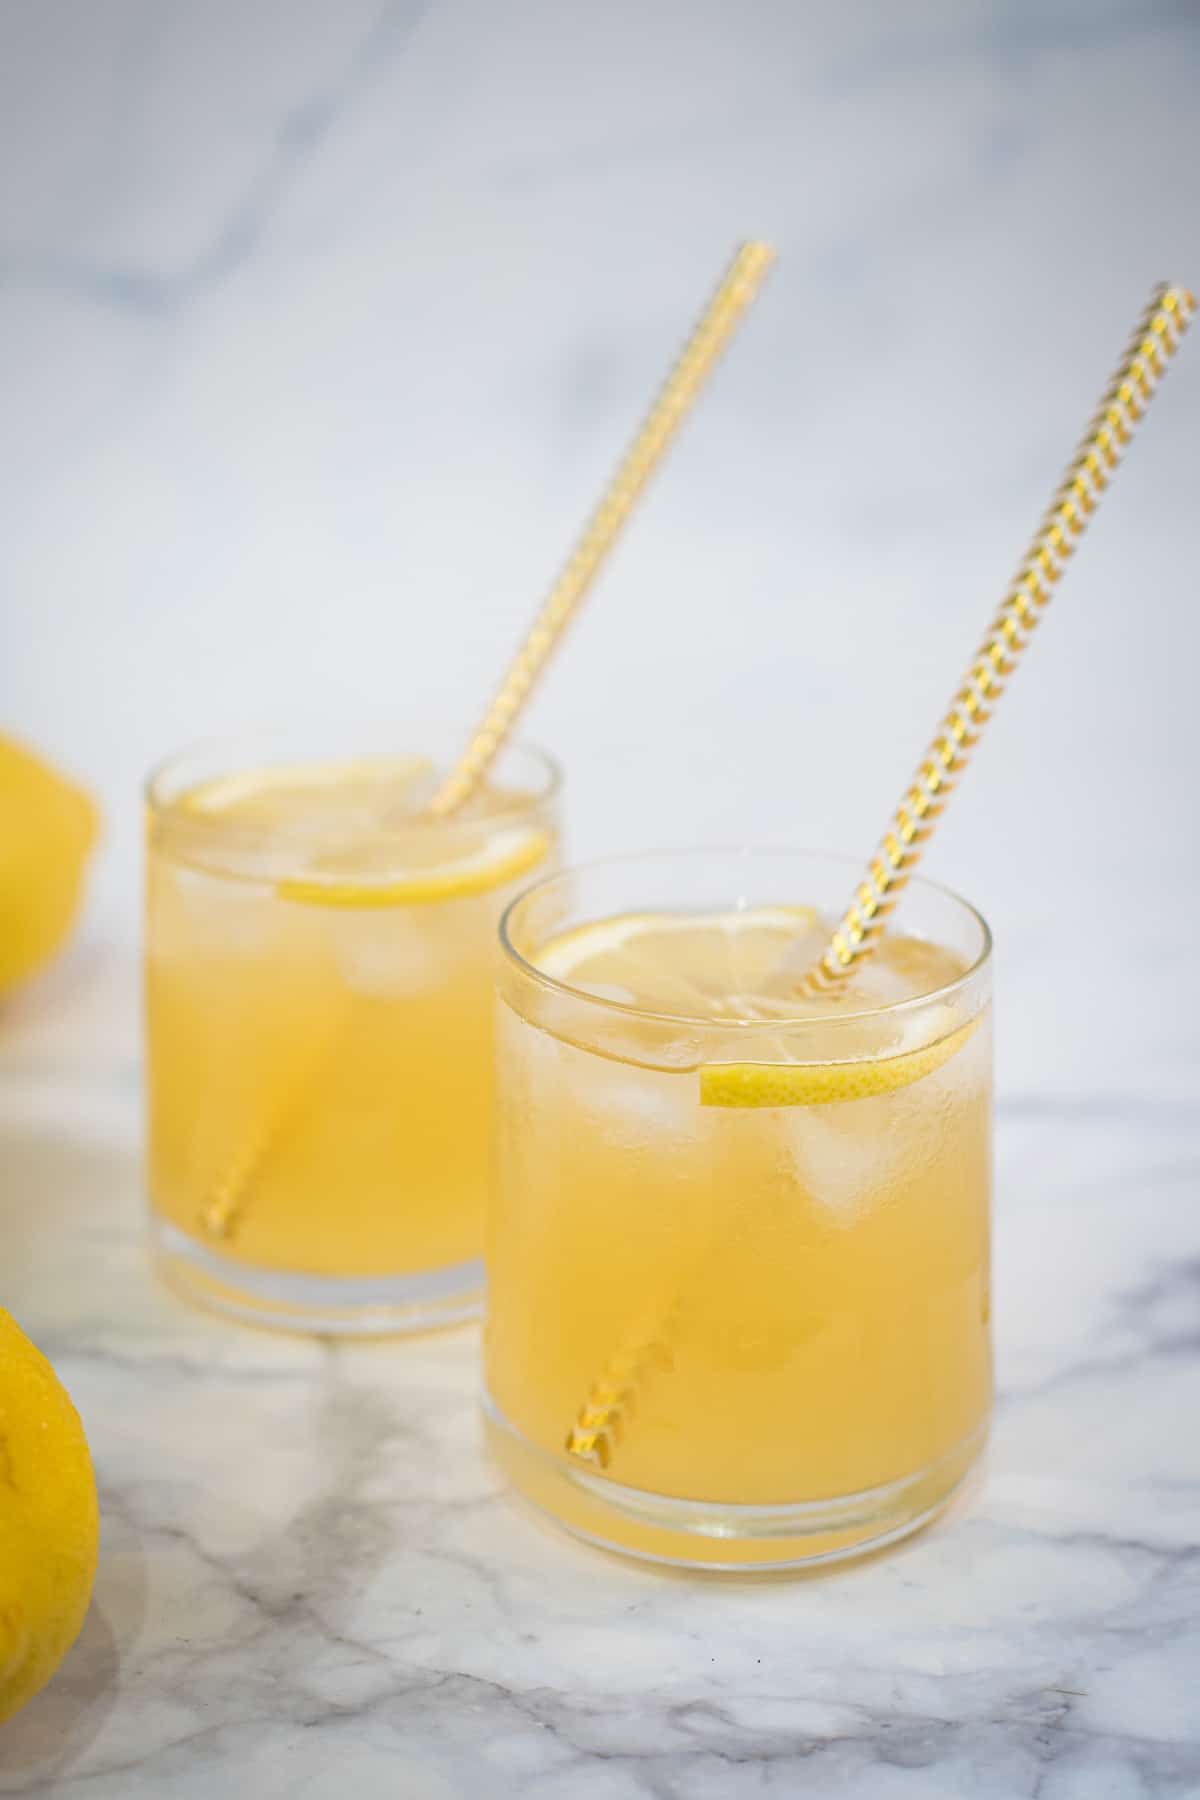 2 cups of lemonade with gold stripes straws